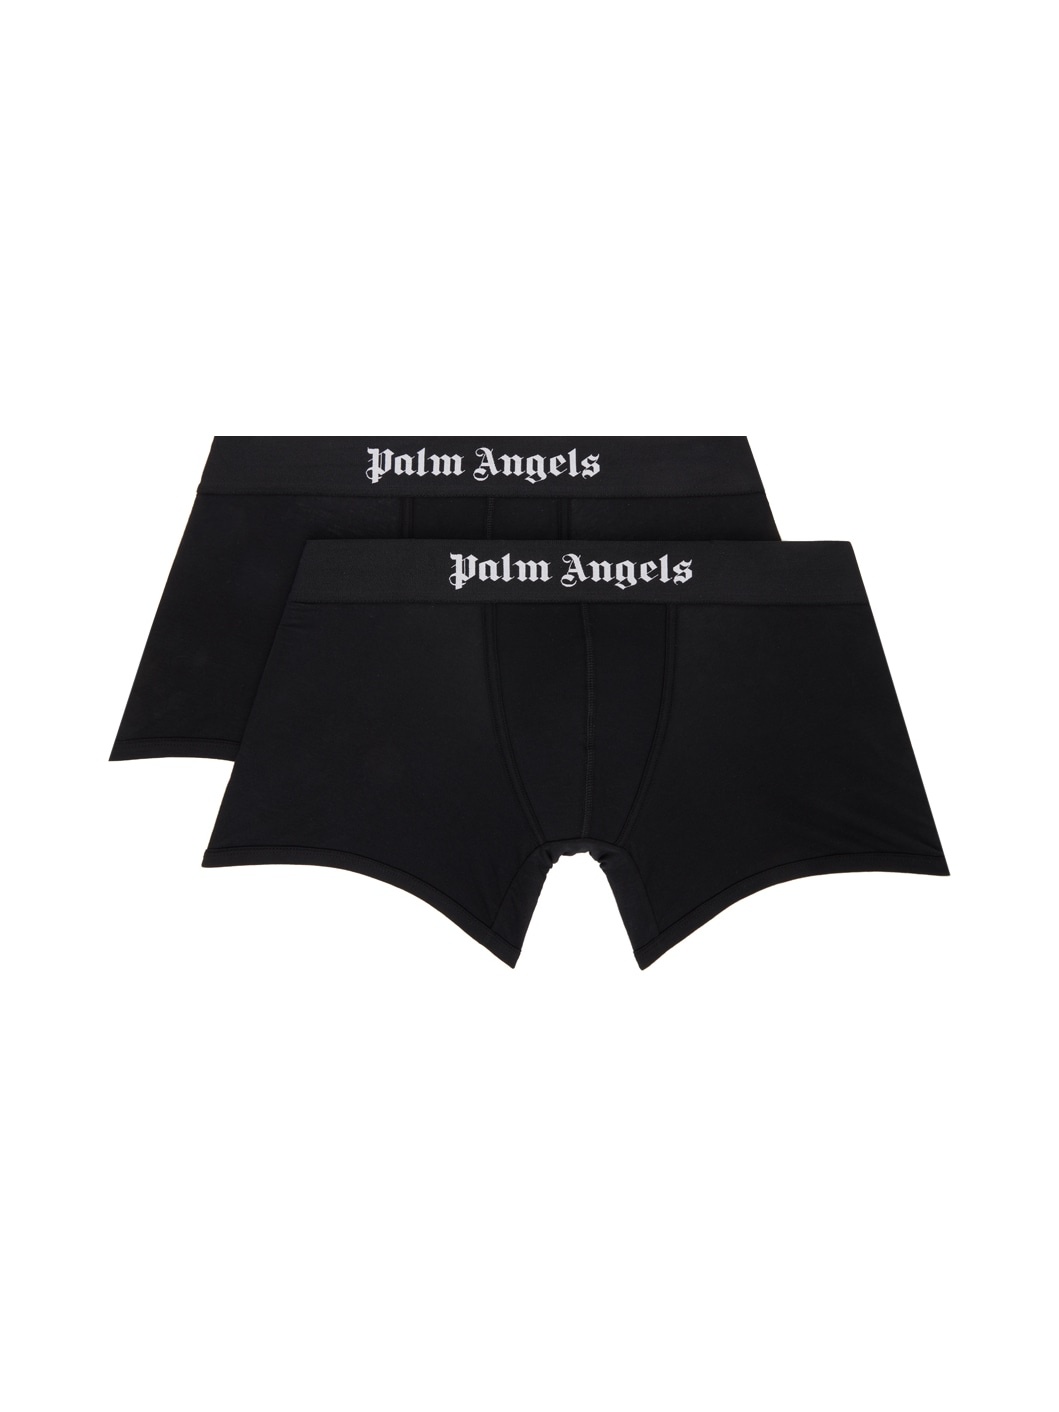 Two-Pack Black 'Palm Angels' Boxers - 1